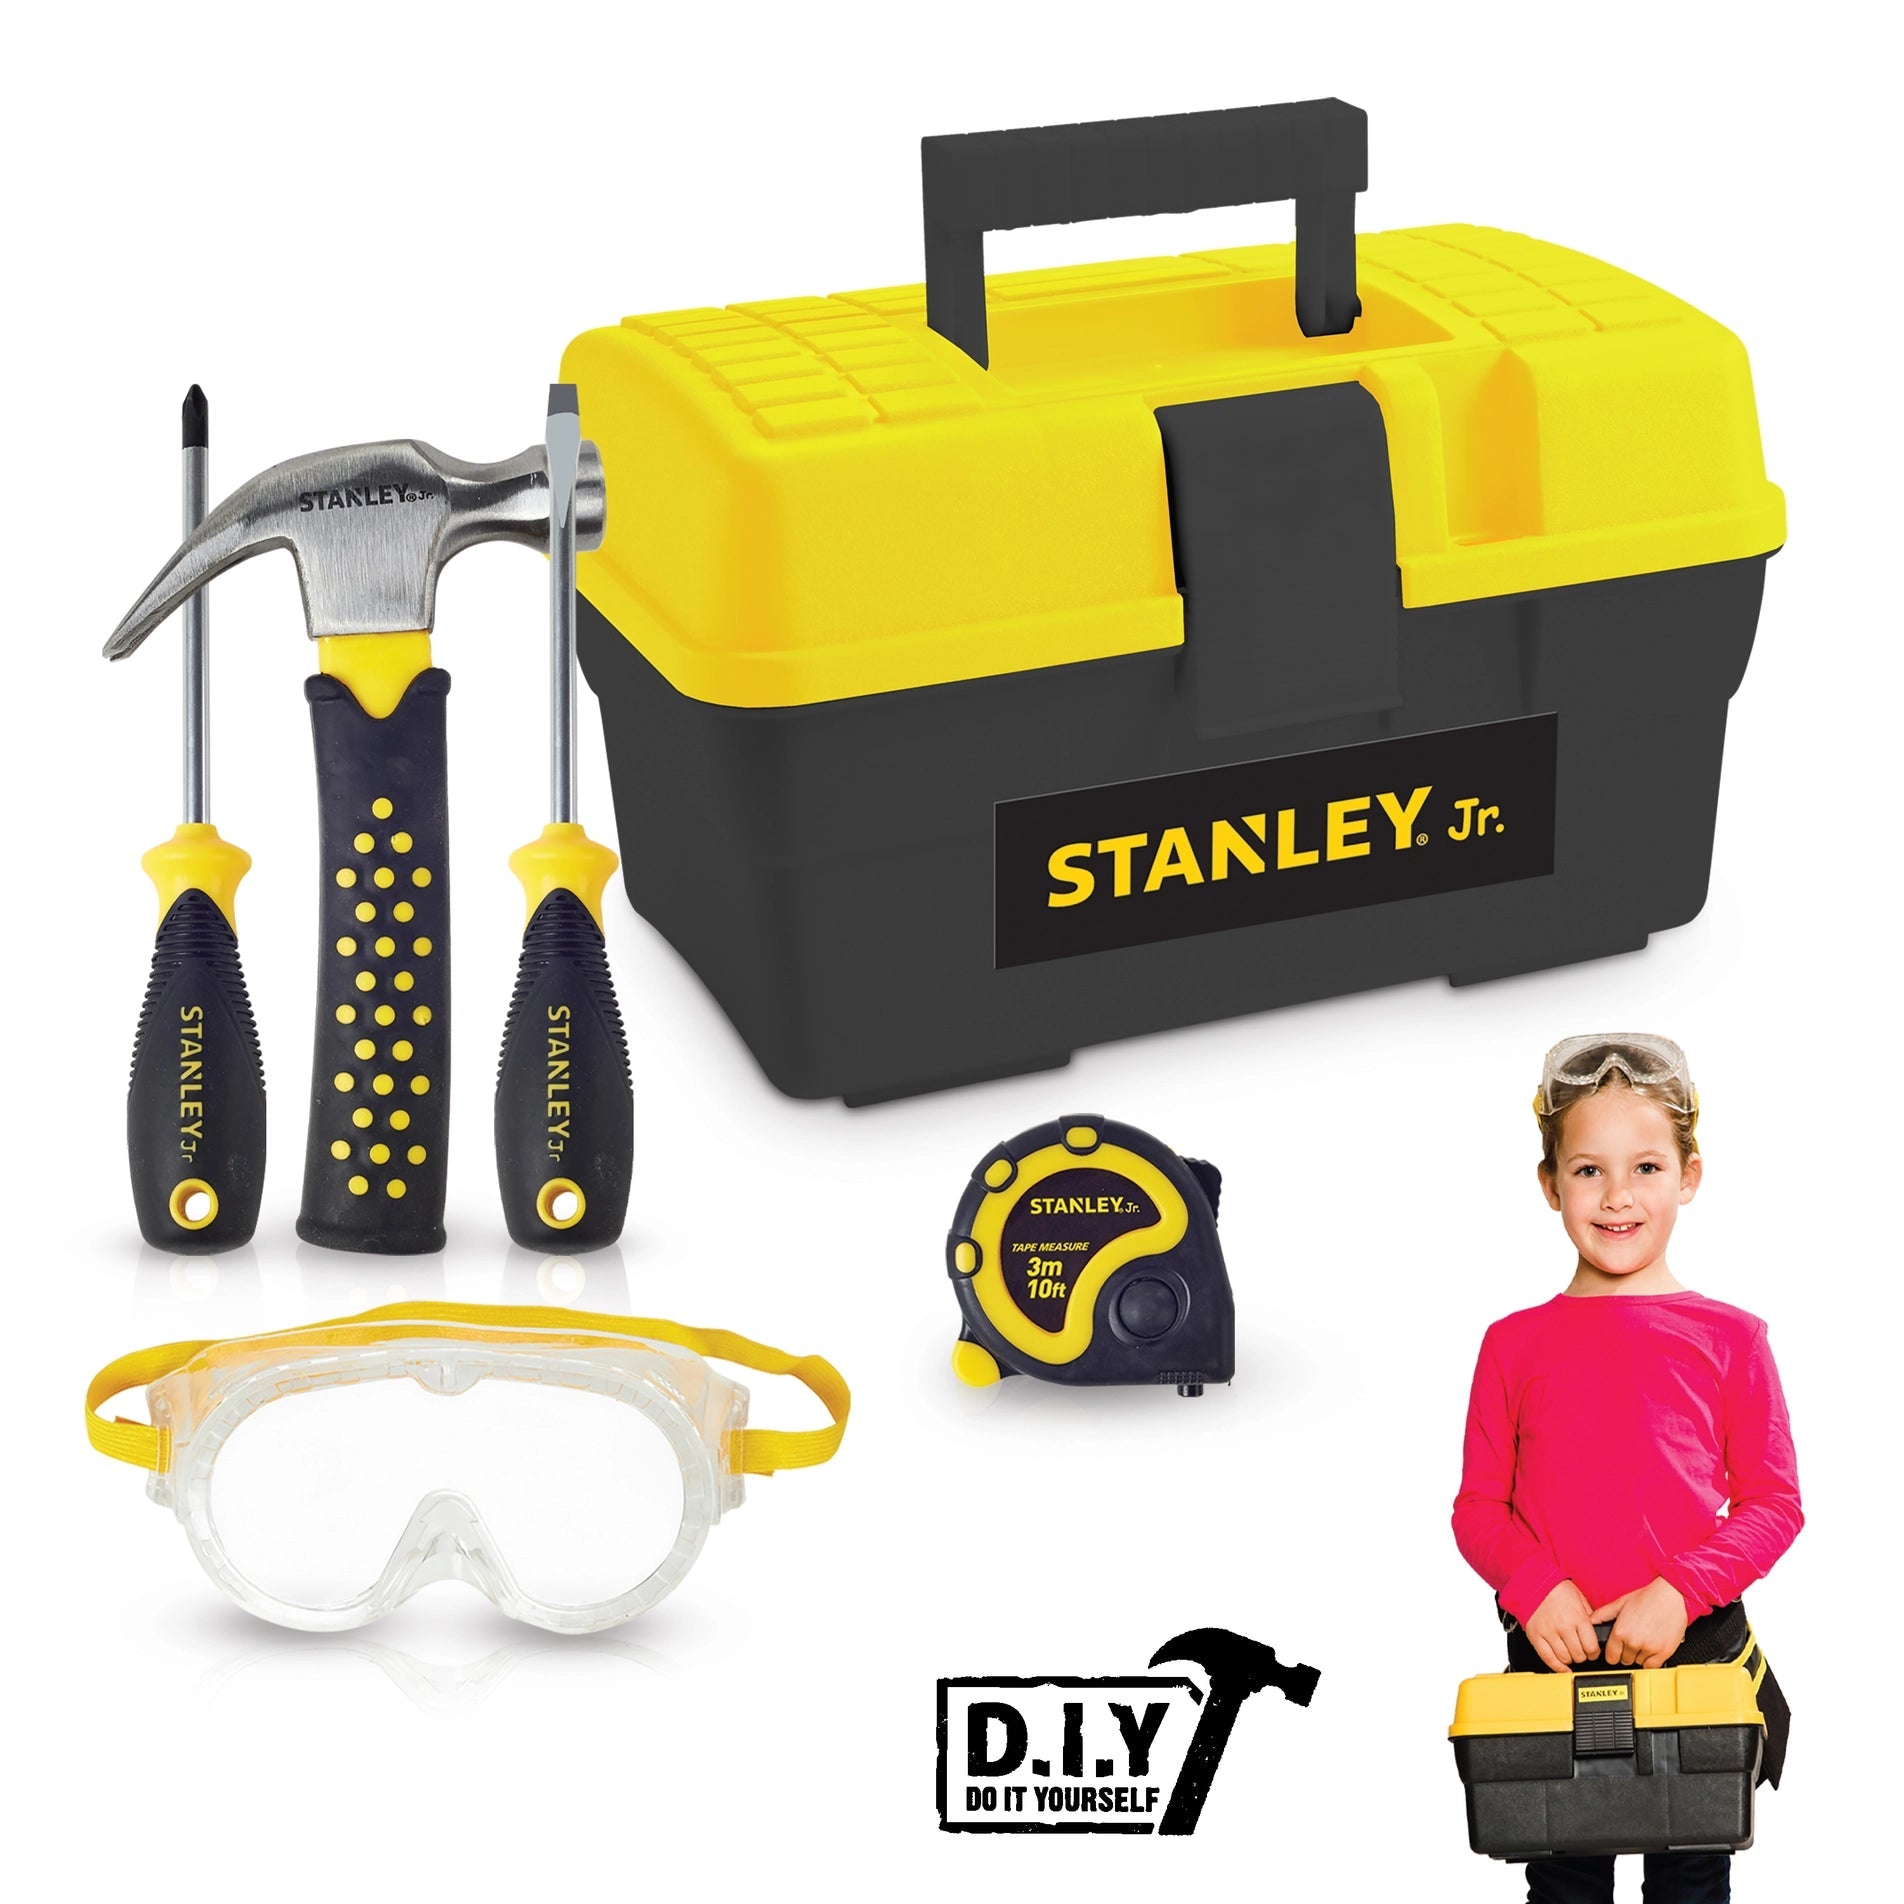 Toolbox with Toolset 5 PC Stanley Jr. - RED TOOL BOX